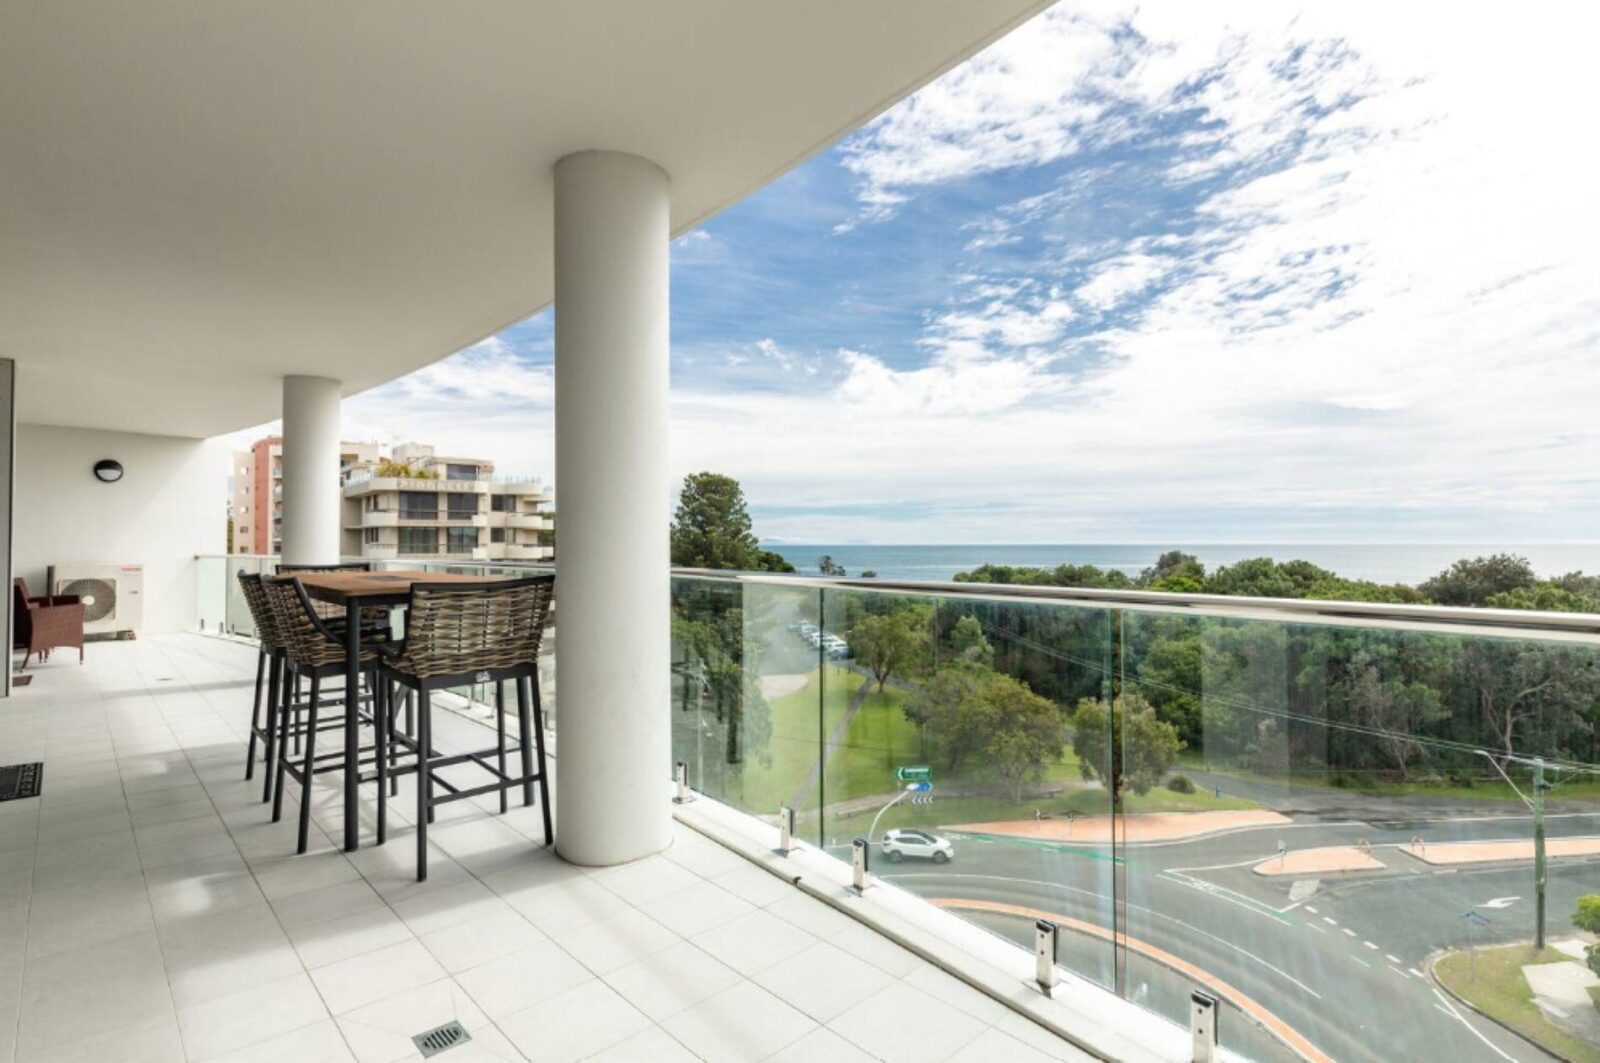 Balcony with outdoor setting and ocean views